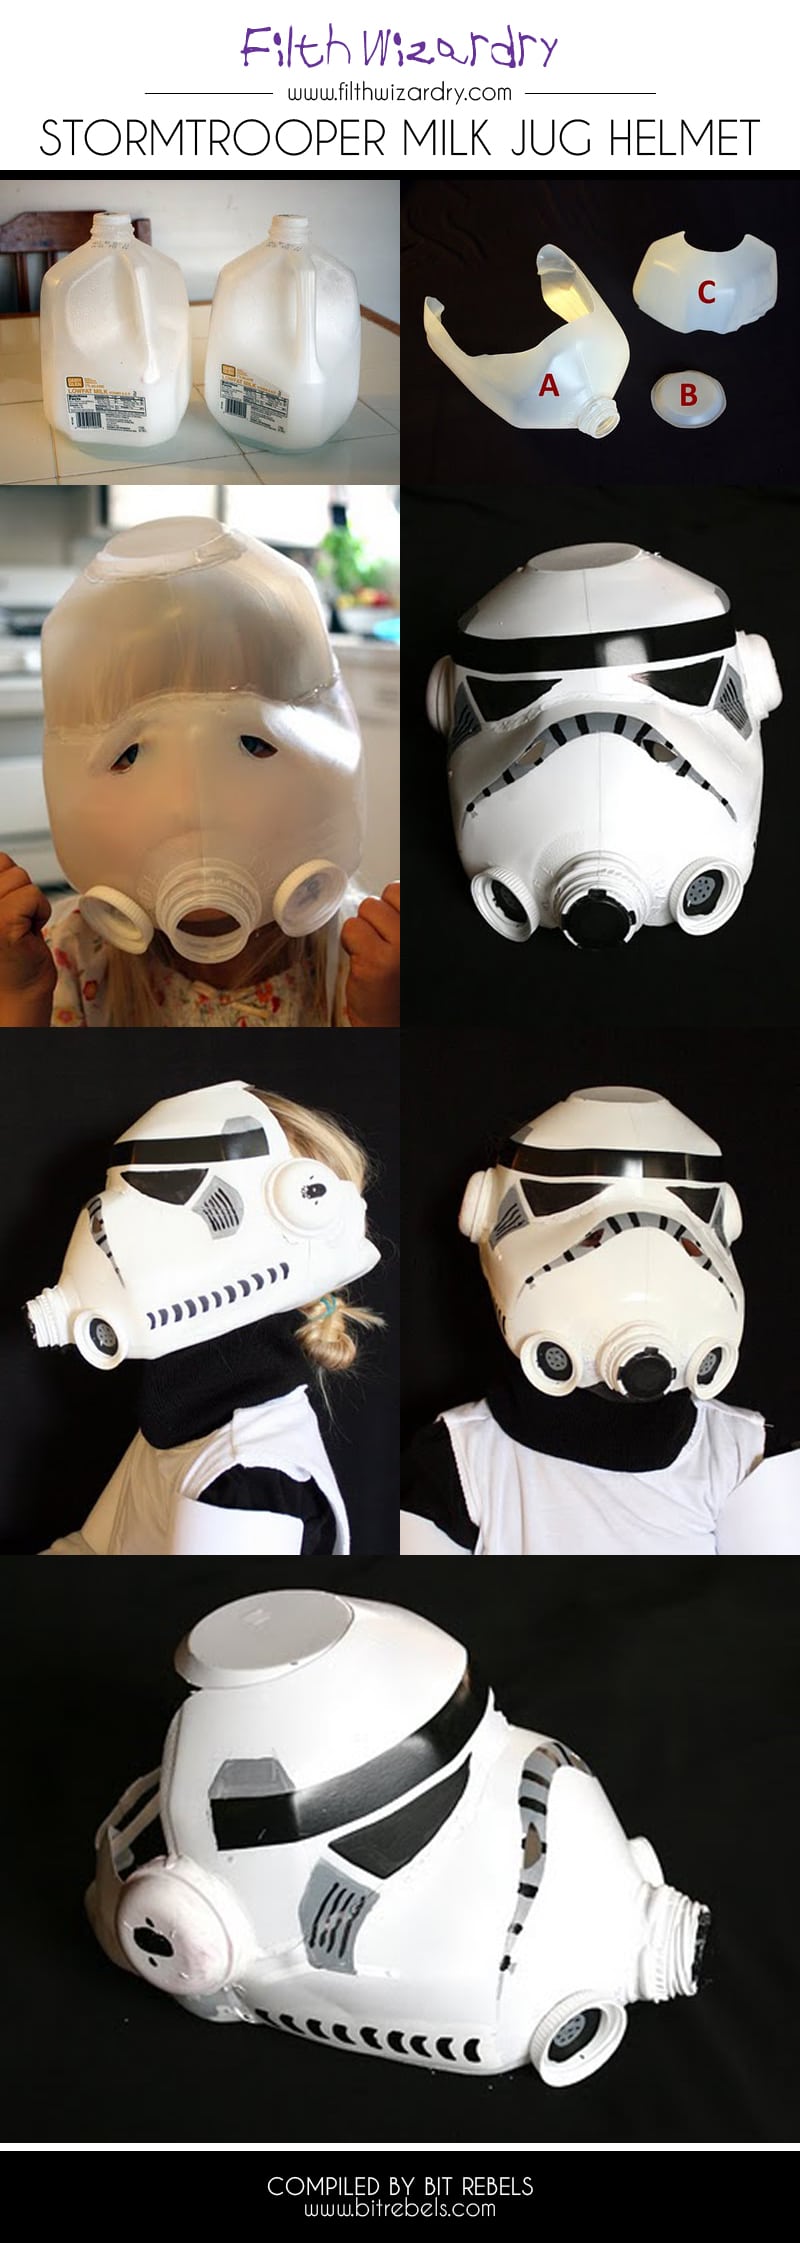 Stormtrooper Helmet Created Entirely Out Of A Milk Jug